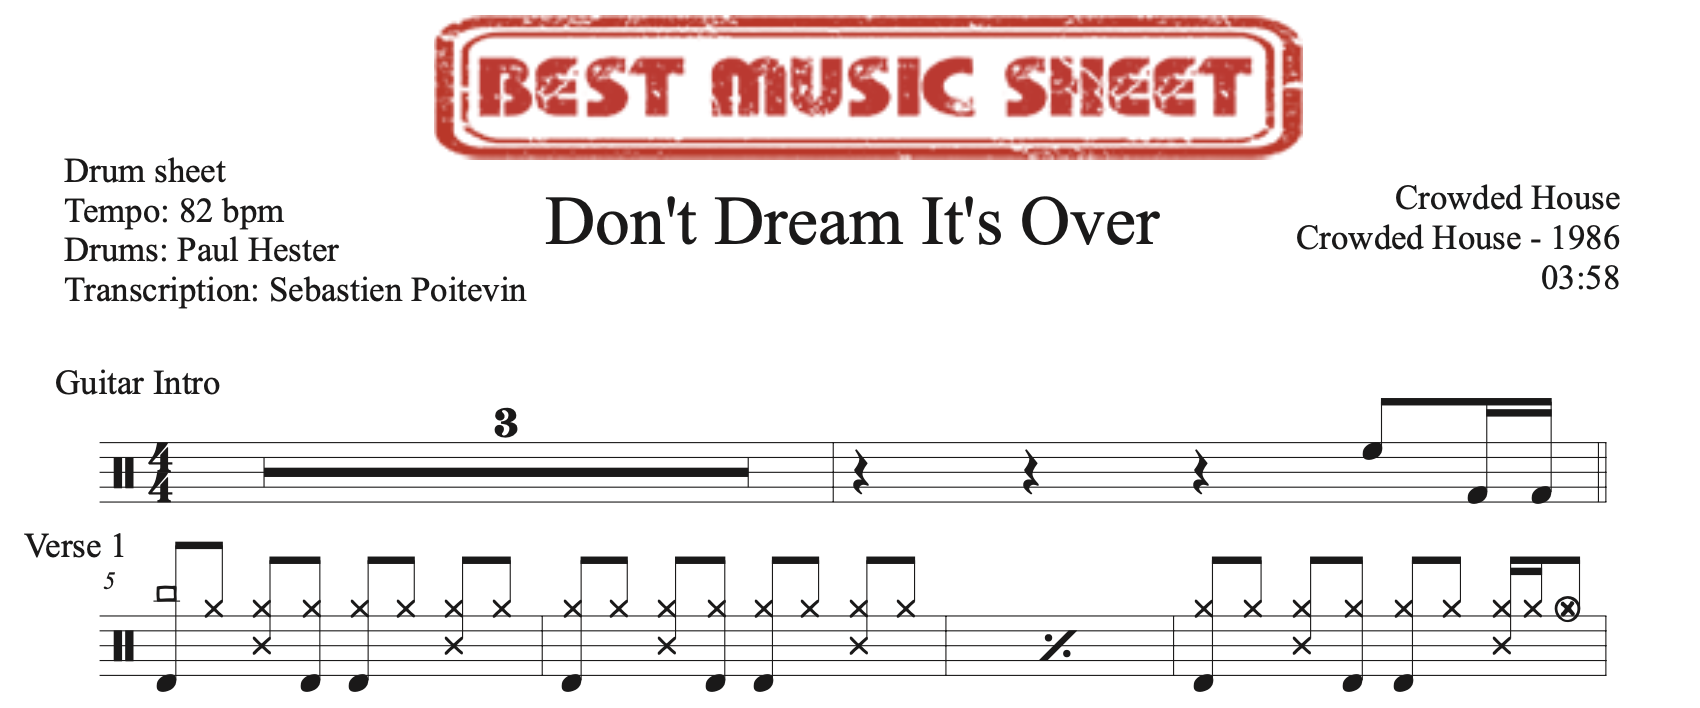 Sample drum sheet of Don't Dream It's Over by Crowded House